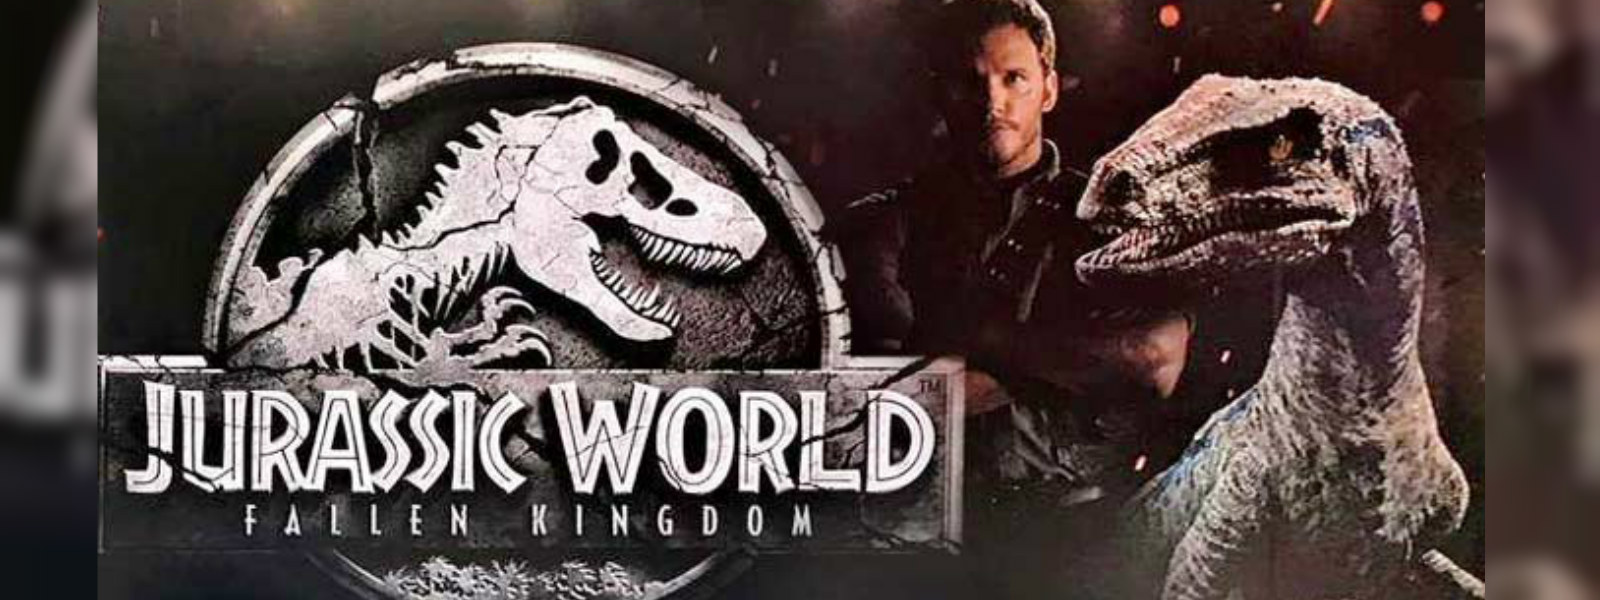 'Jurassic World' expected to retain box office